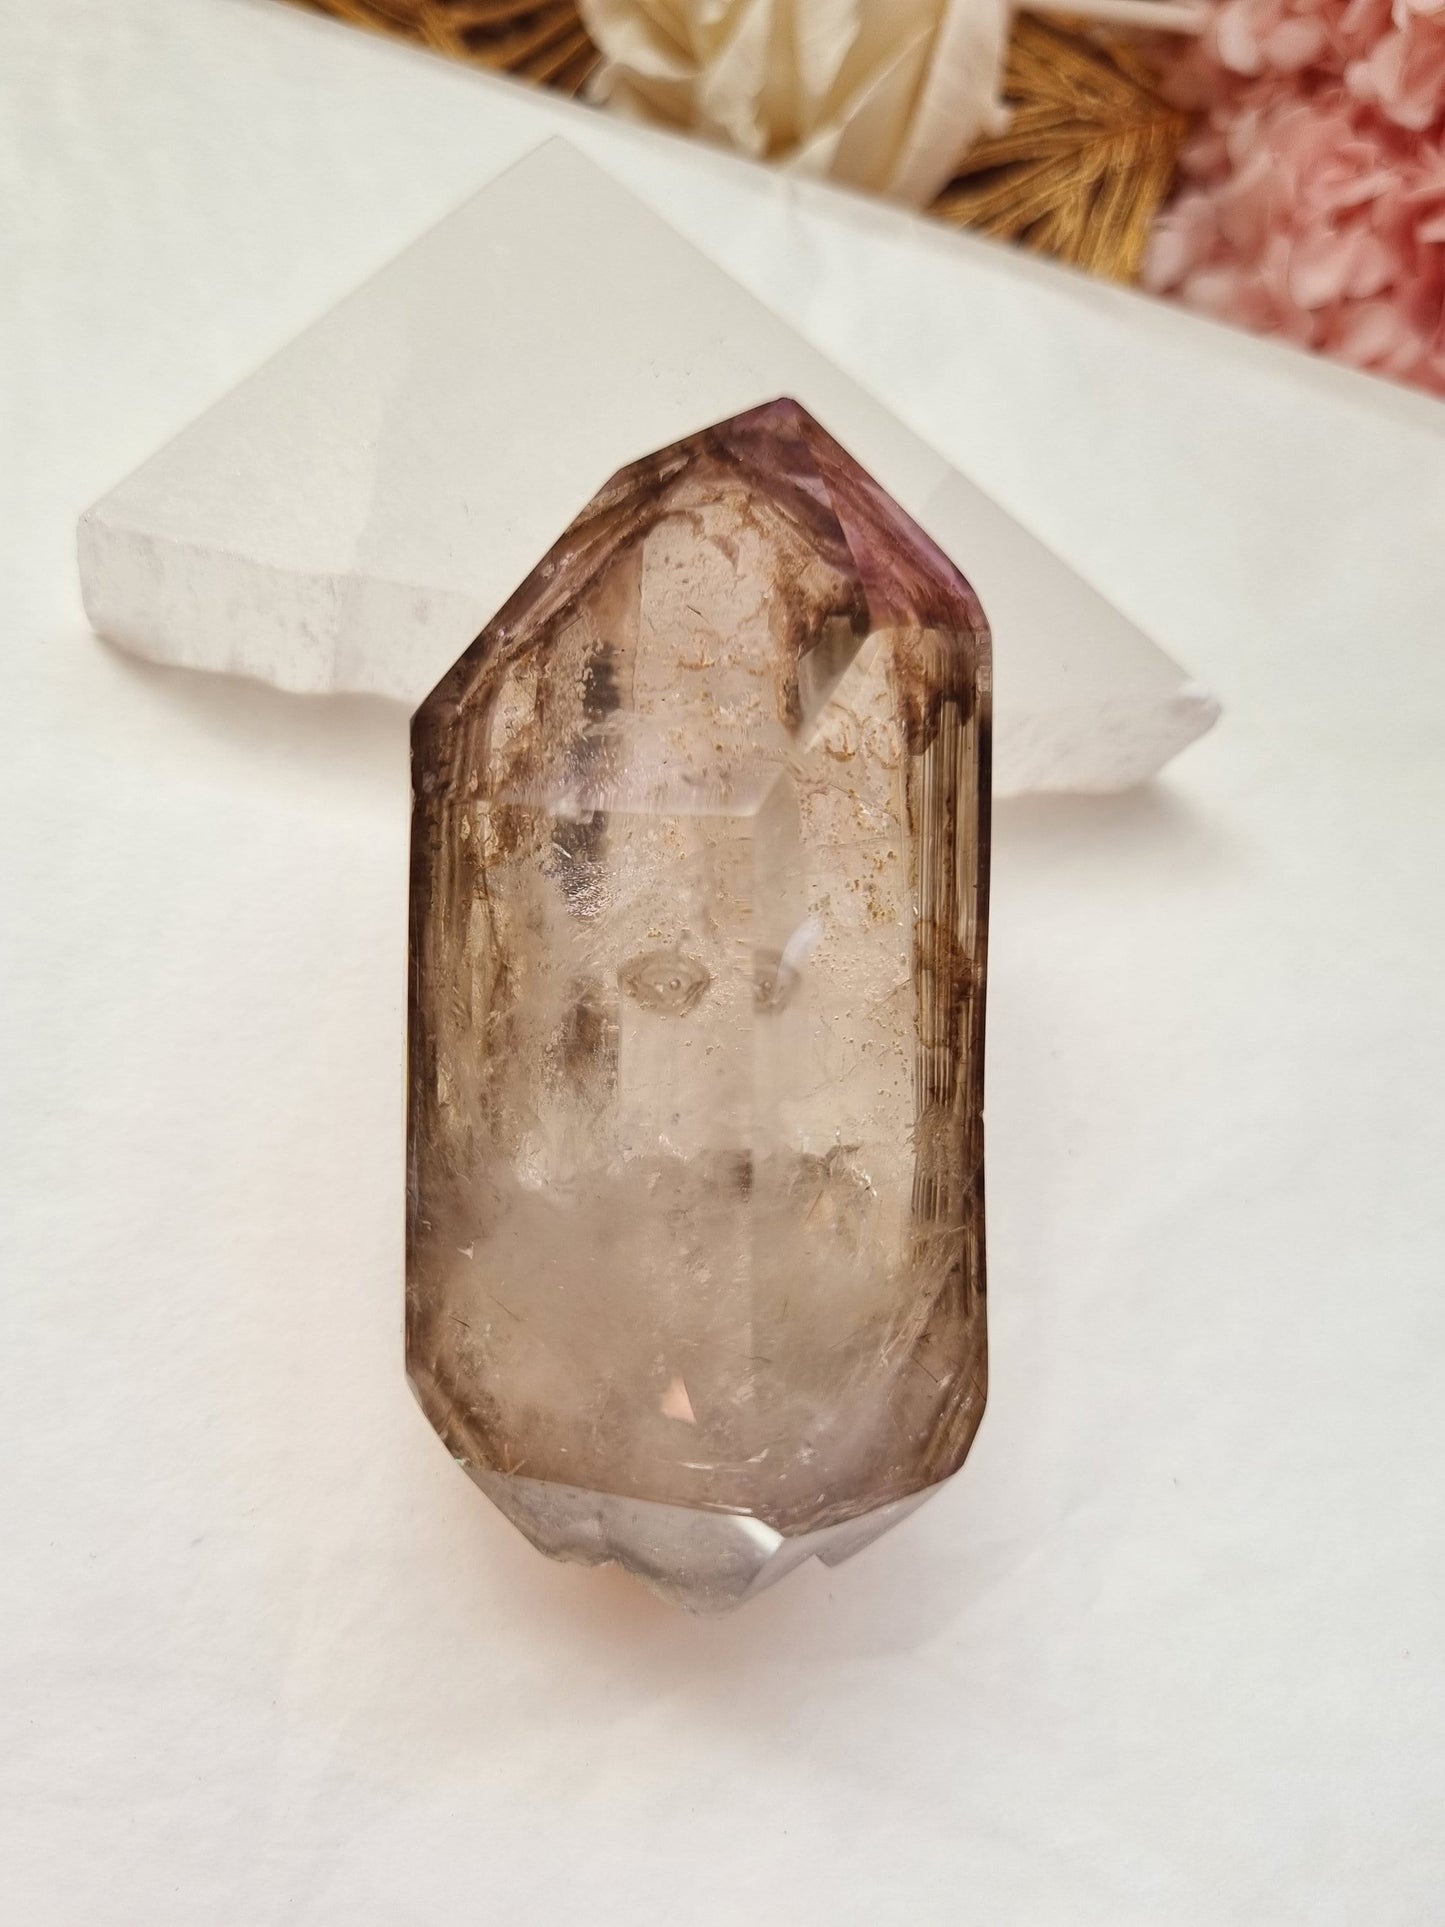 Smoky manifest enhydro with amethyst inclusions